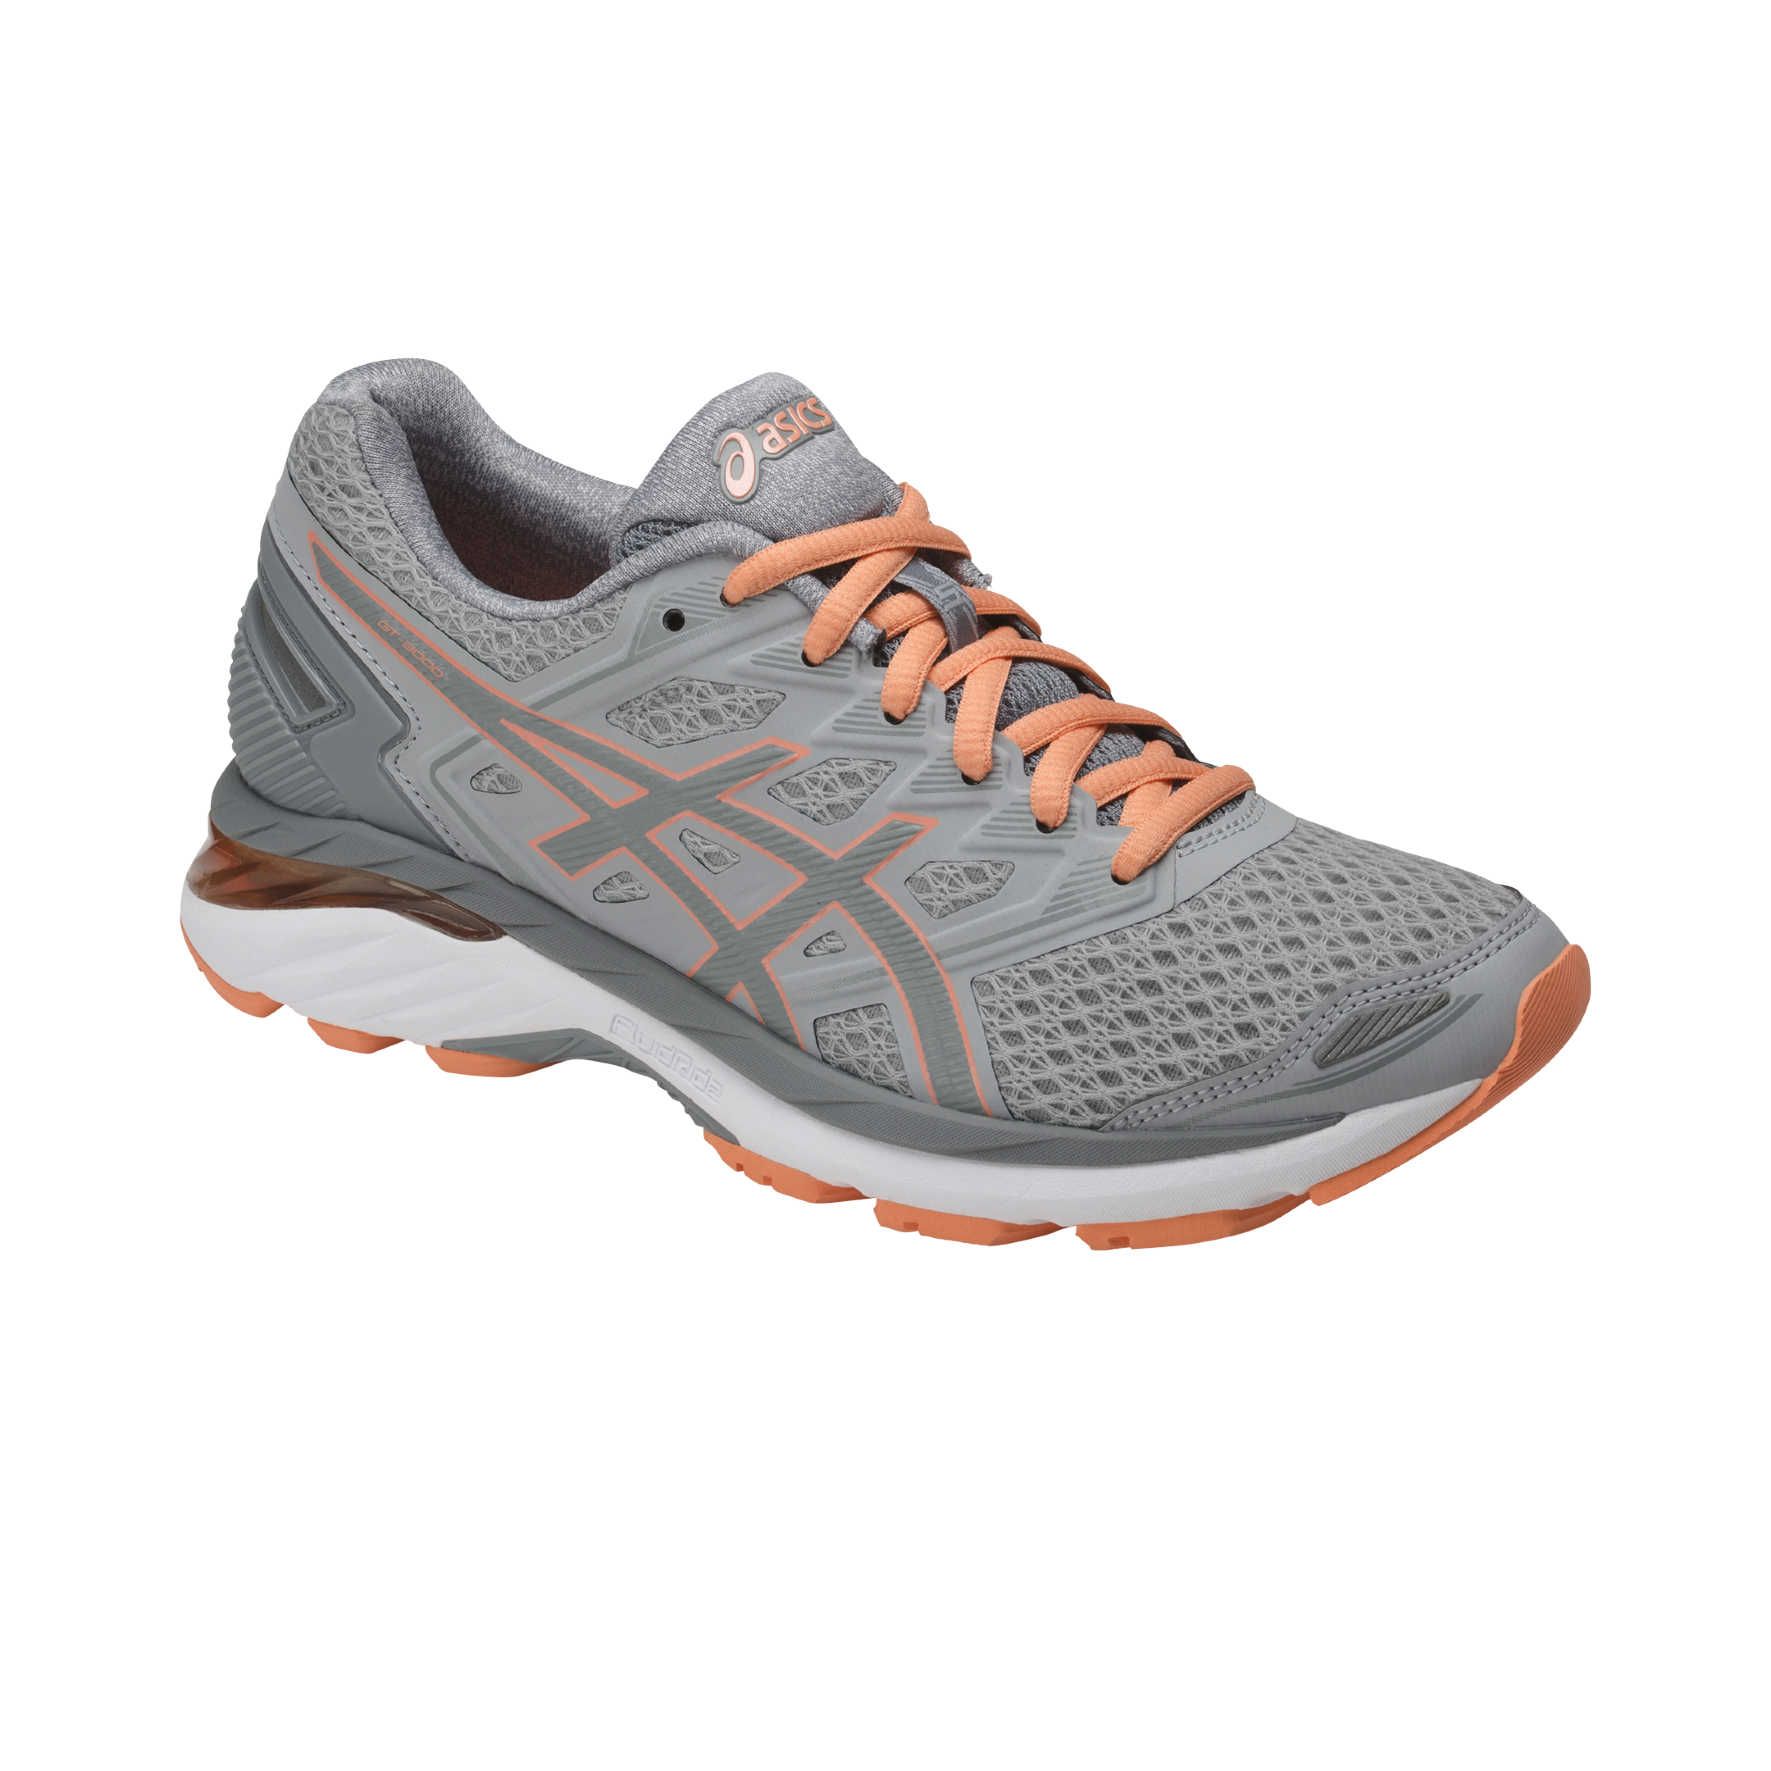 Chaussures Running Femmes Asics GT3000 5 - Mid Grey/Stone Grey/Canteloupe